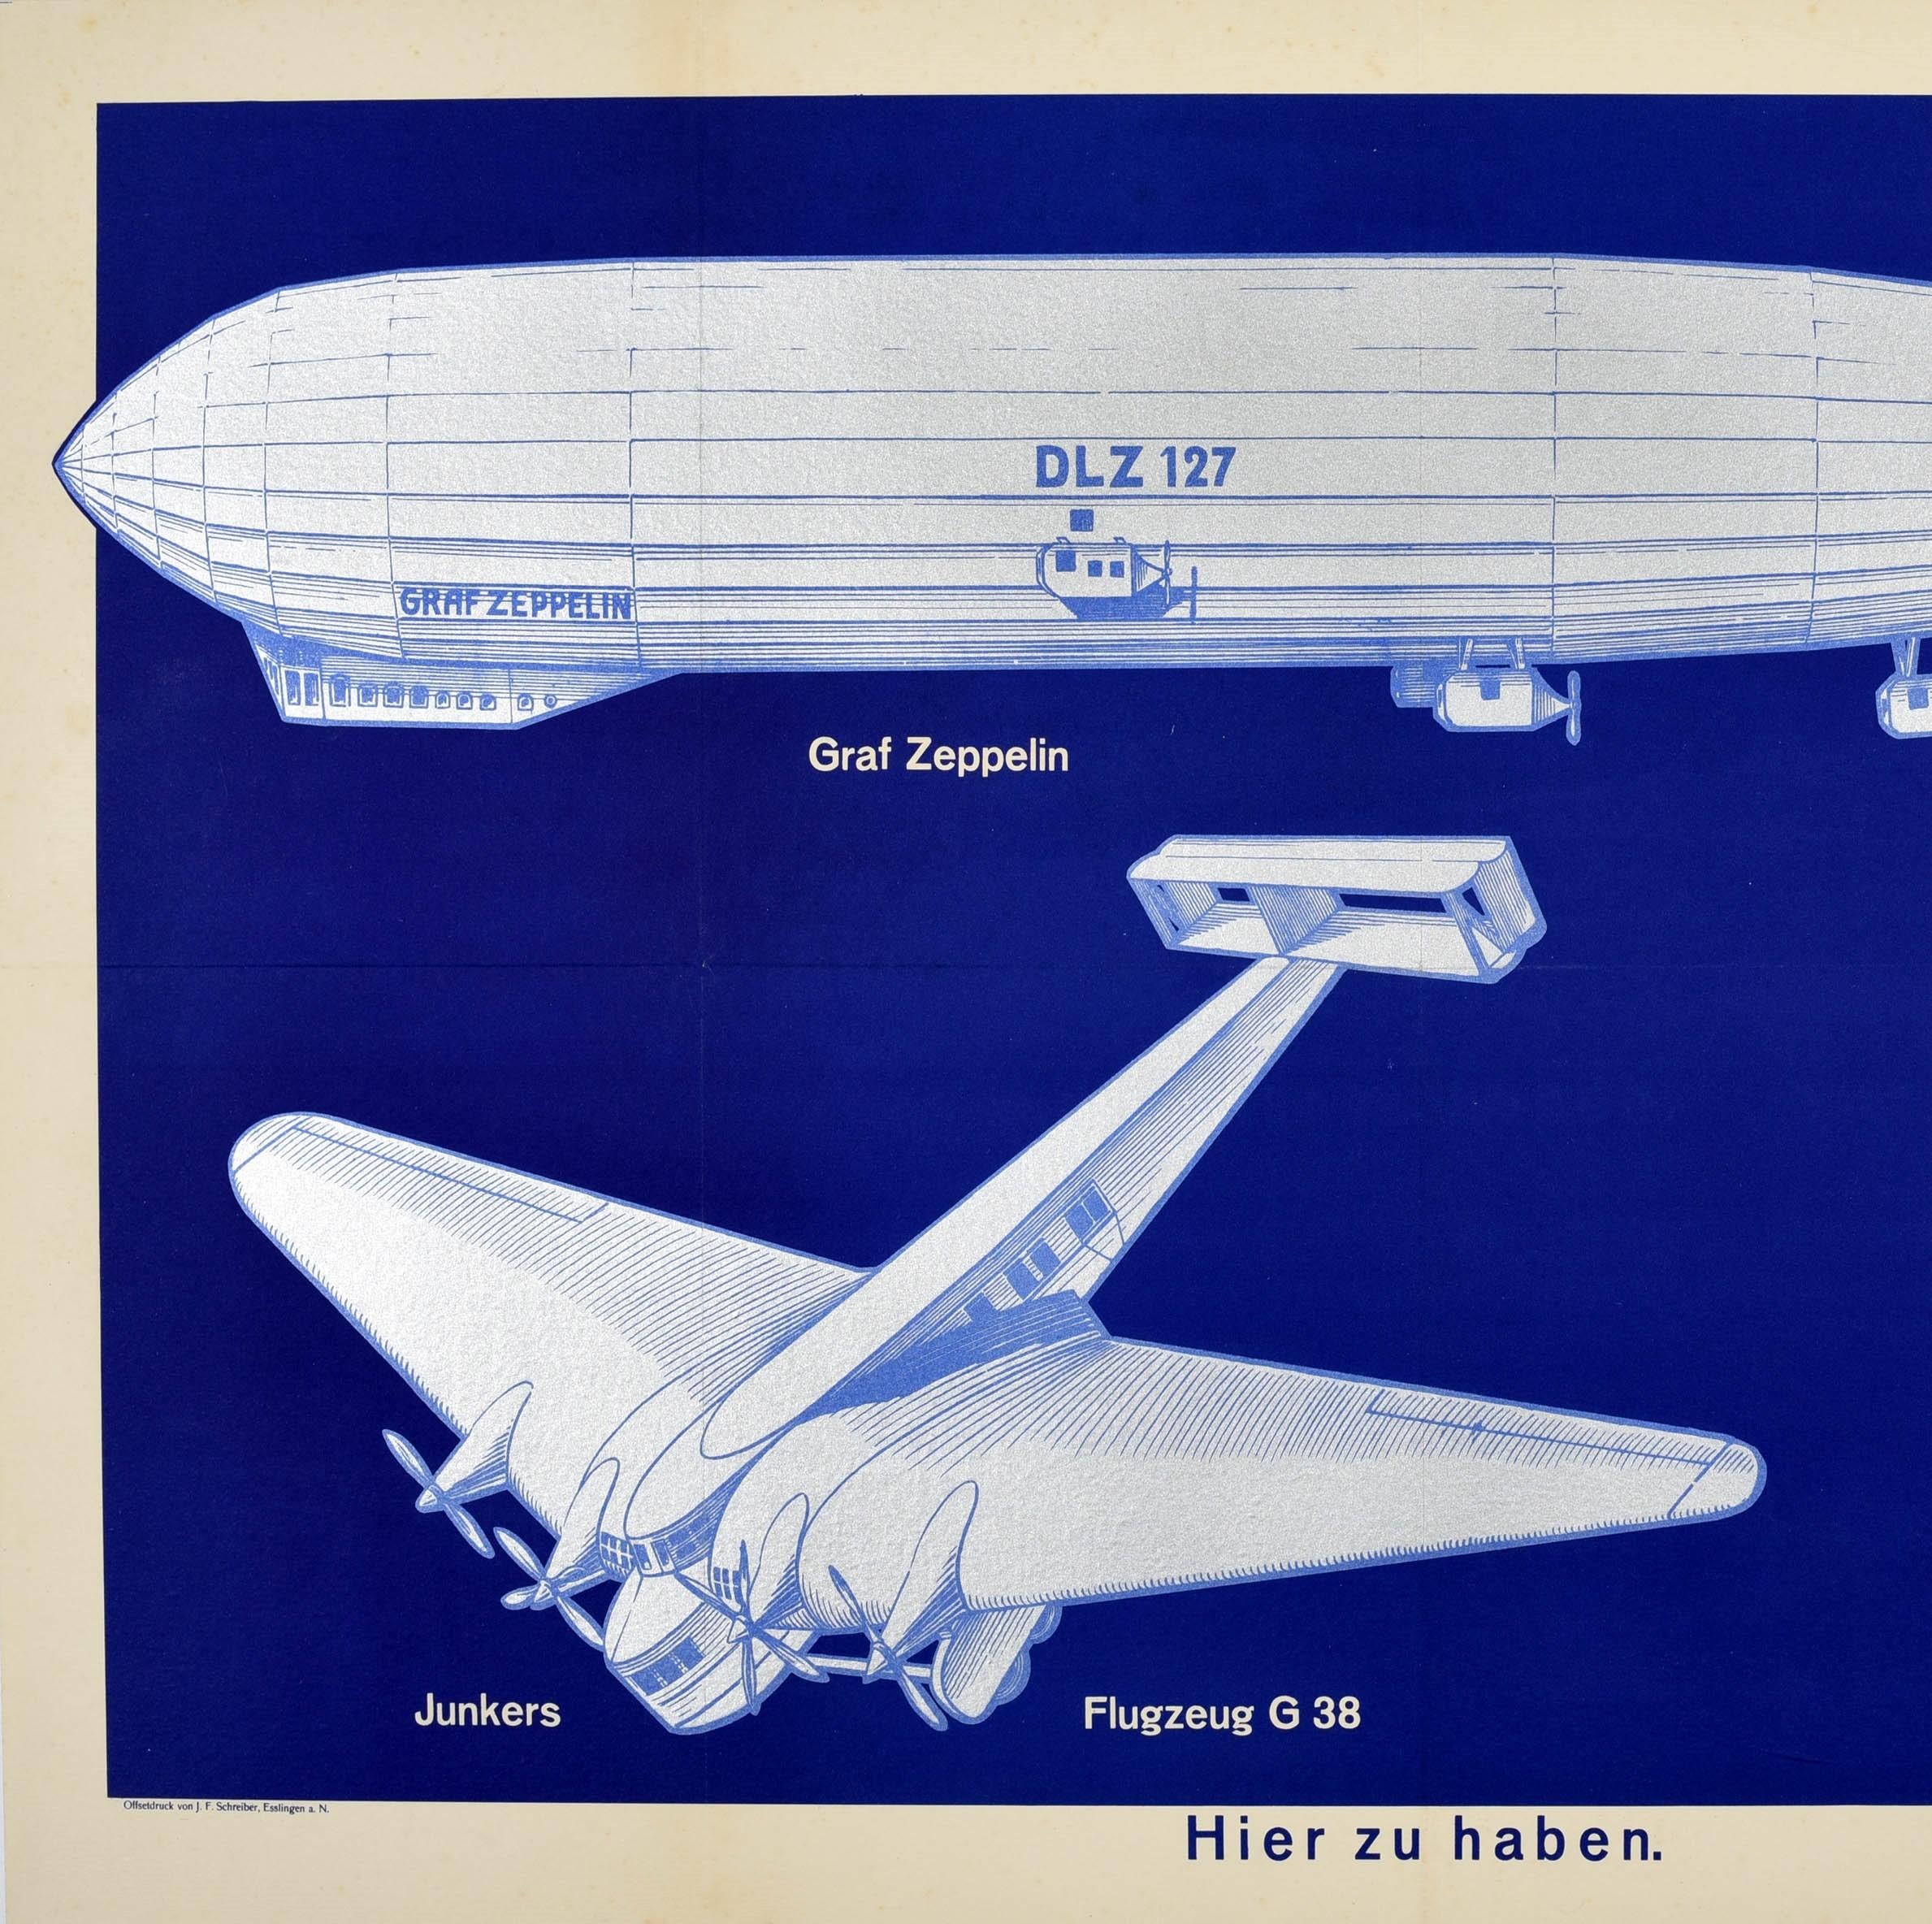 Original vintage poster advertising Schreibers Technische Modellierbogen / Technical Air Modelling kits featuring images of a Graf Zeppelin marked DLZ 127 and Junkers Flugzeug G38 aircraft on a blue background with the measurements and details on